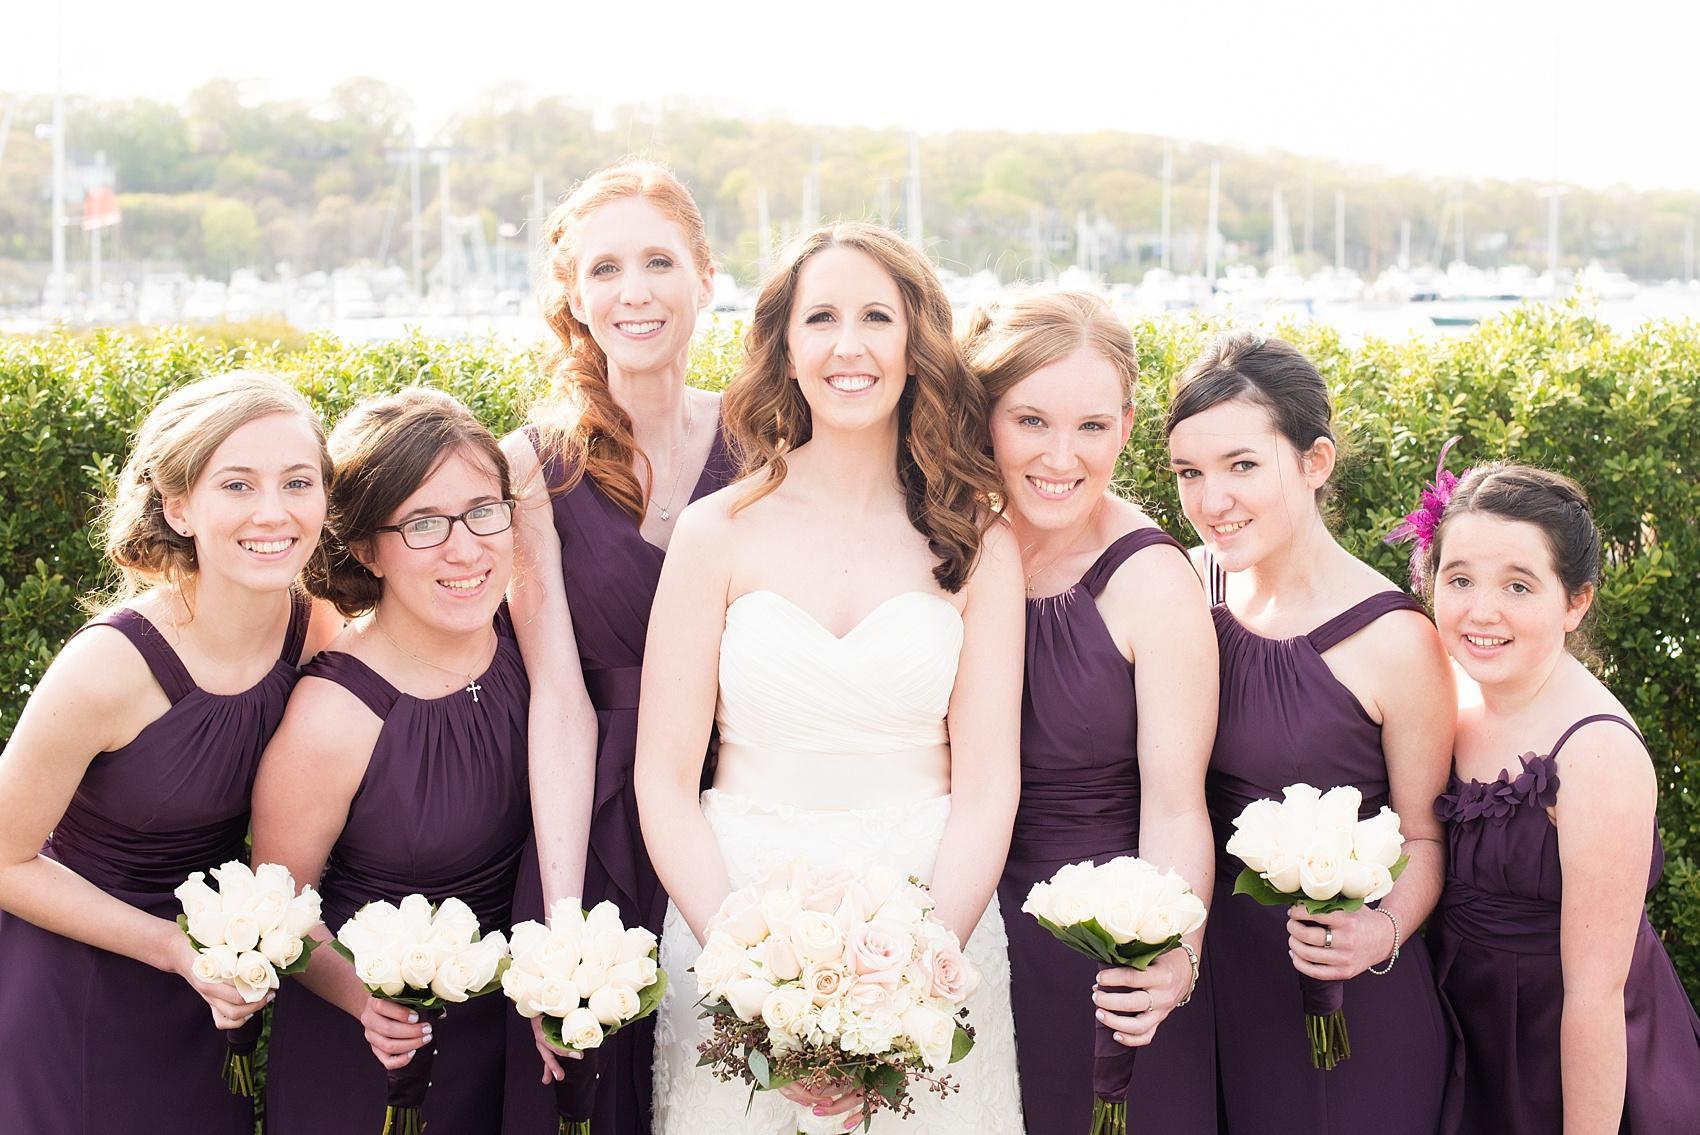 Photos by Mikkel Paige Photography for a wedding at Harbor Club on Long Island. Bride in a strapless white gown with bridesmaids in purple white white and pink roses.